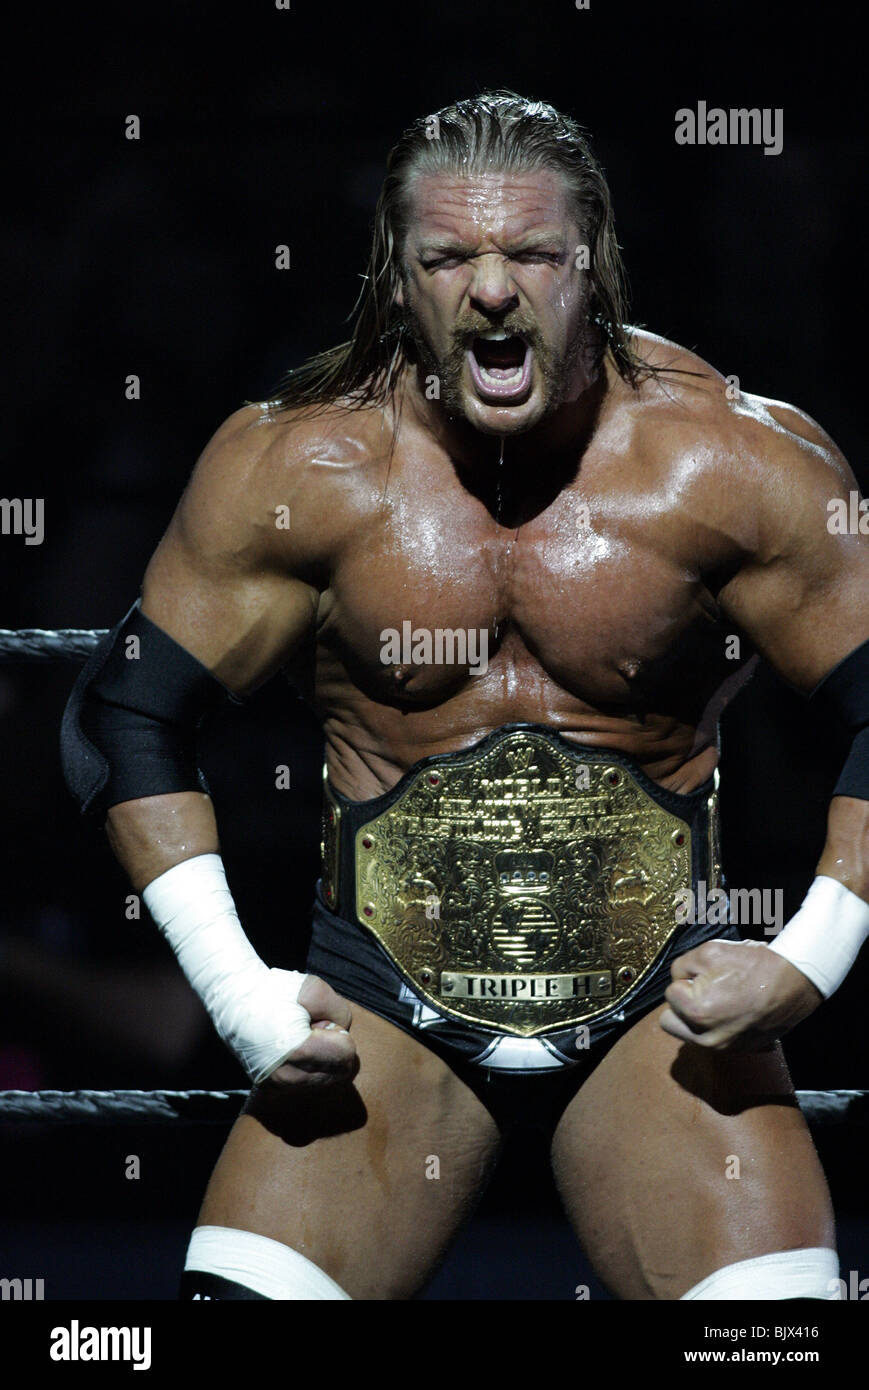 TRIPLE H WRESTLEMANIA 21 GOES HOLLYWOOD STAPLES CENTER LOS ANGELES USA 03 April 2005 Stock Photo